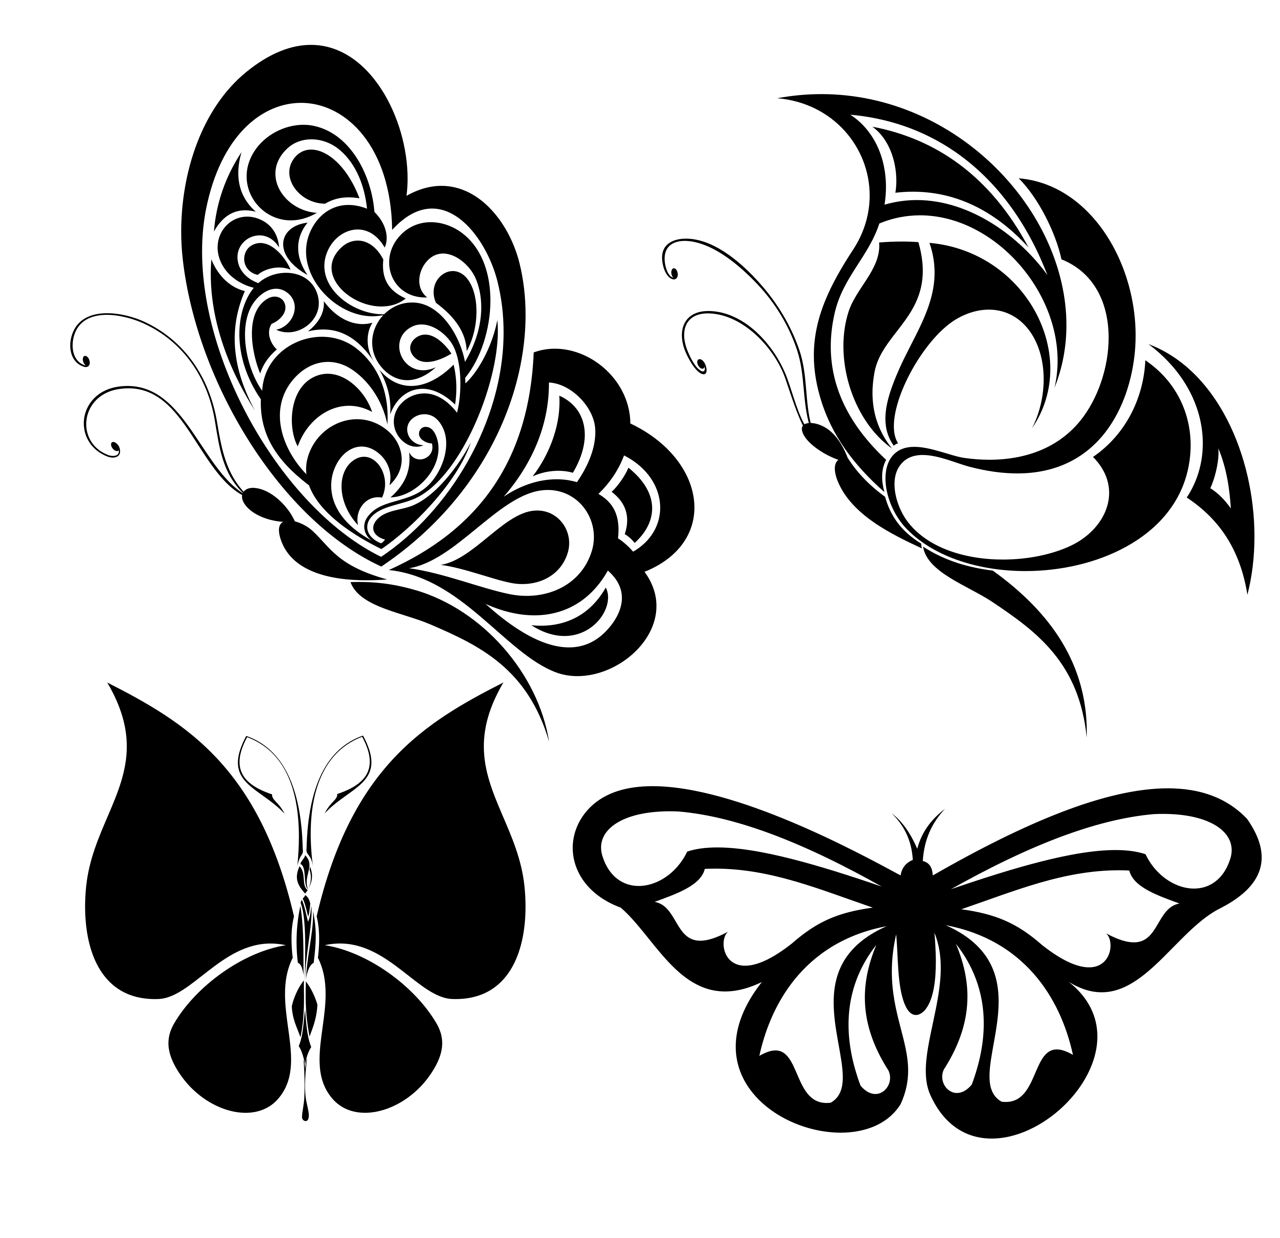 Butterfly Tattoos on Hip - Thoughtful Tattoos